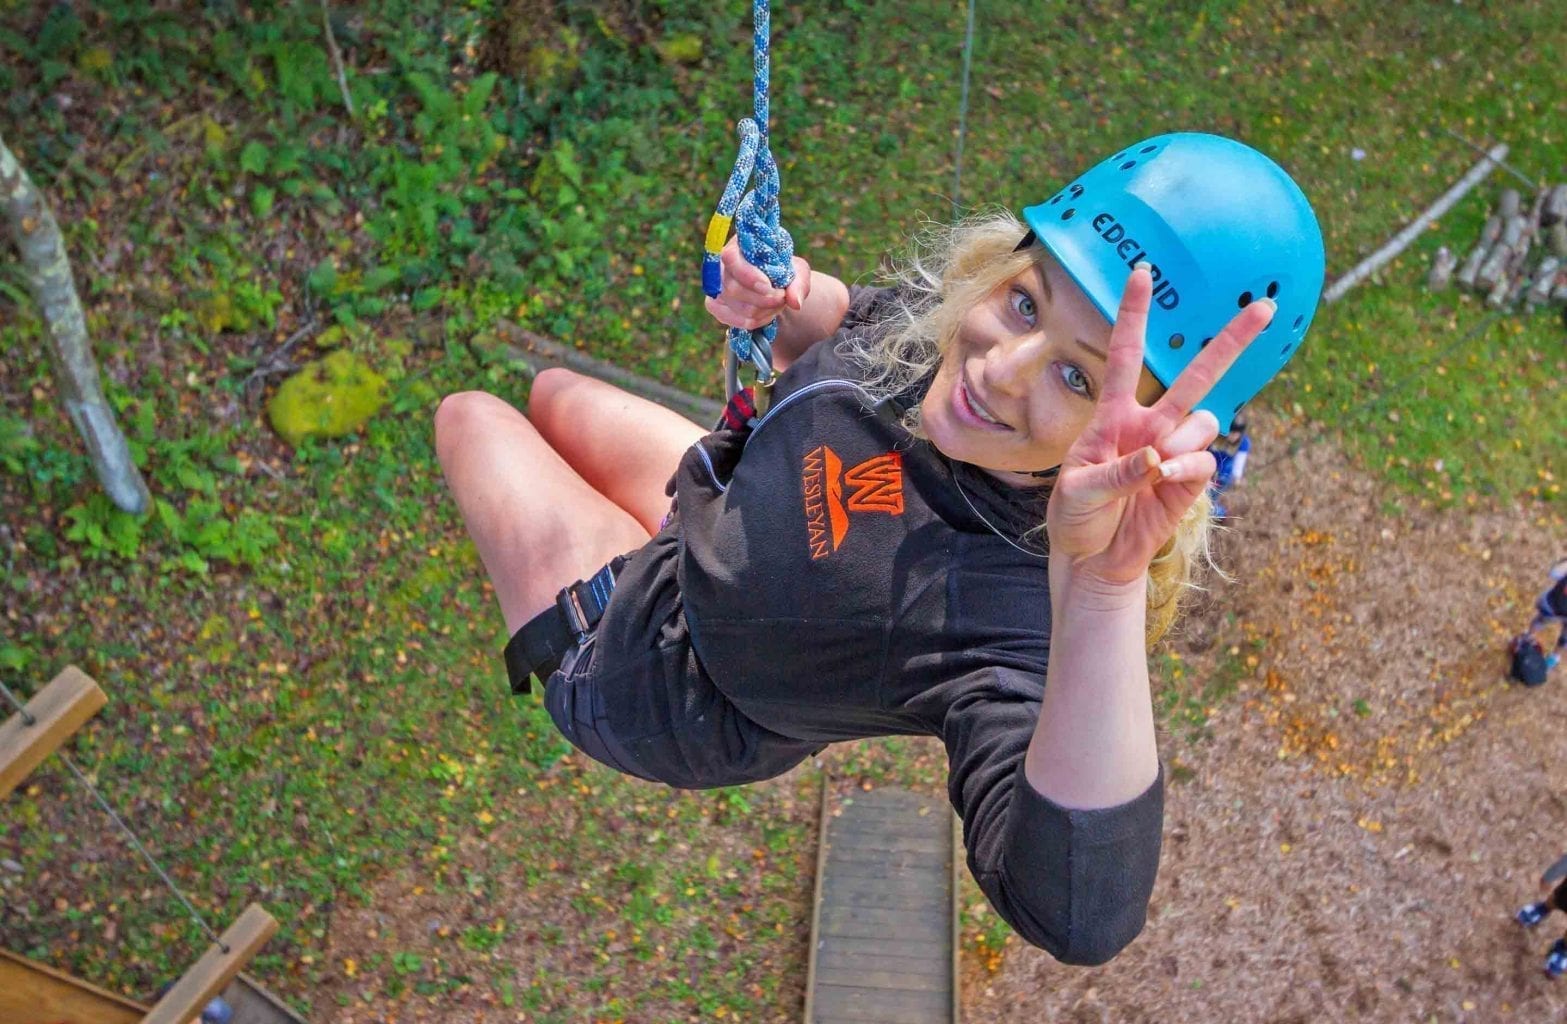 A college student flashes a peace sign while suspended in the air over the Team Challenge Course at ACE Adventure Resort